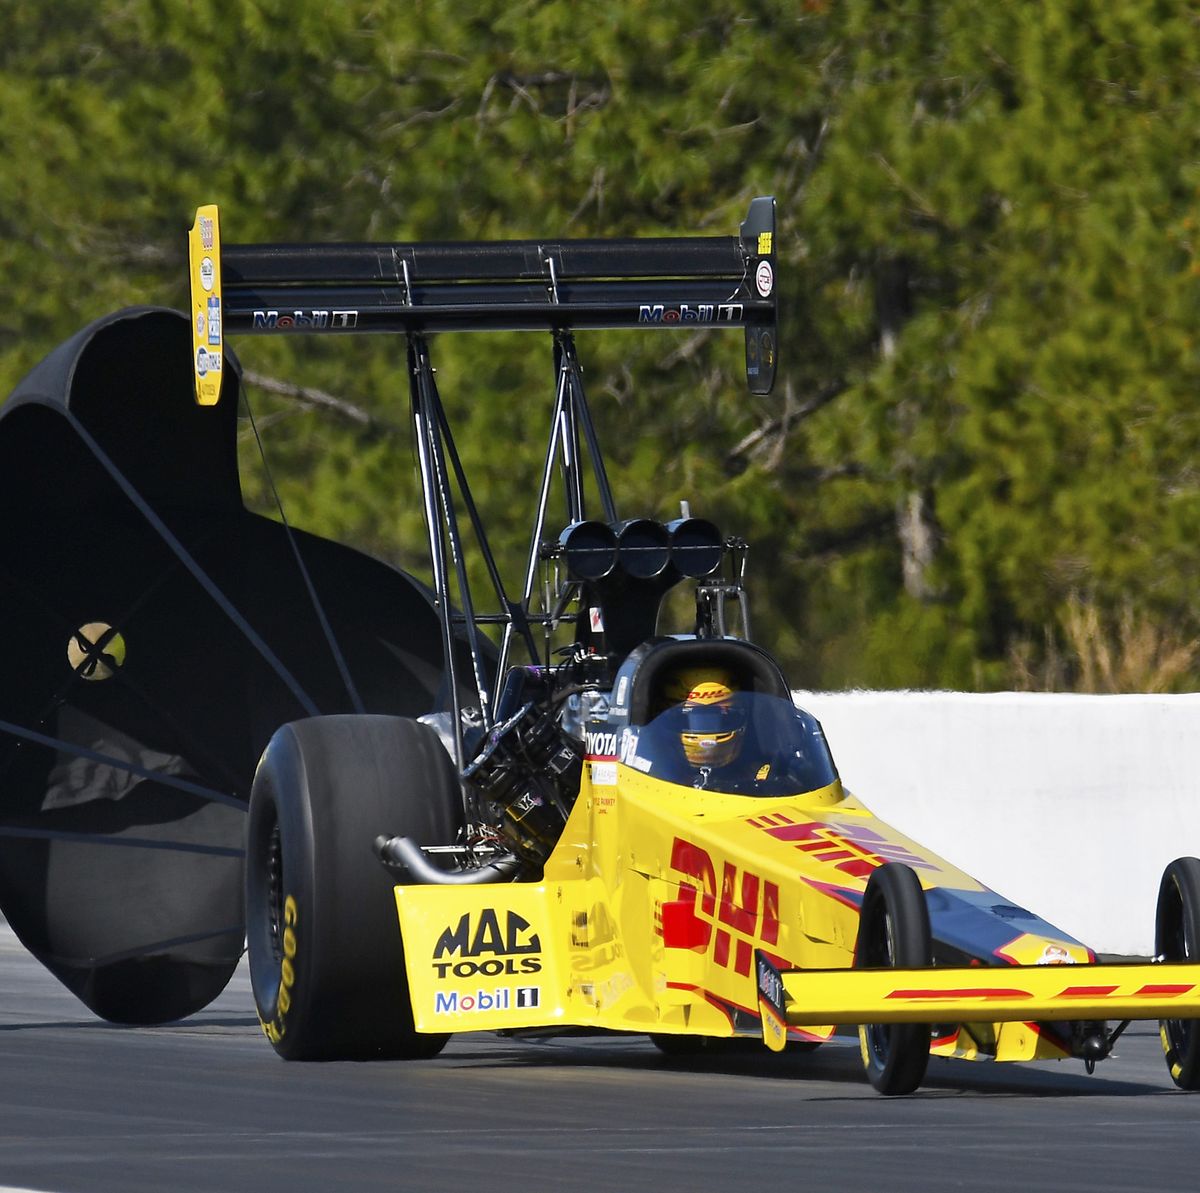 Here's the Between NHRA Fuel Dragster and a Top Alcohol Dragster